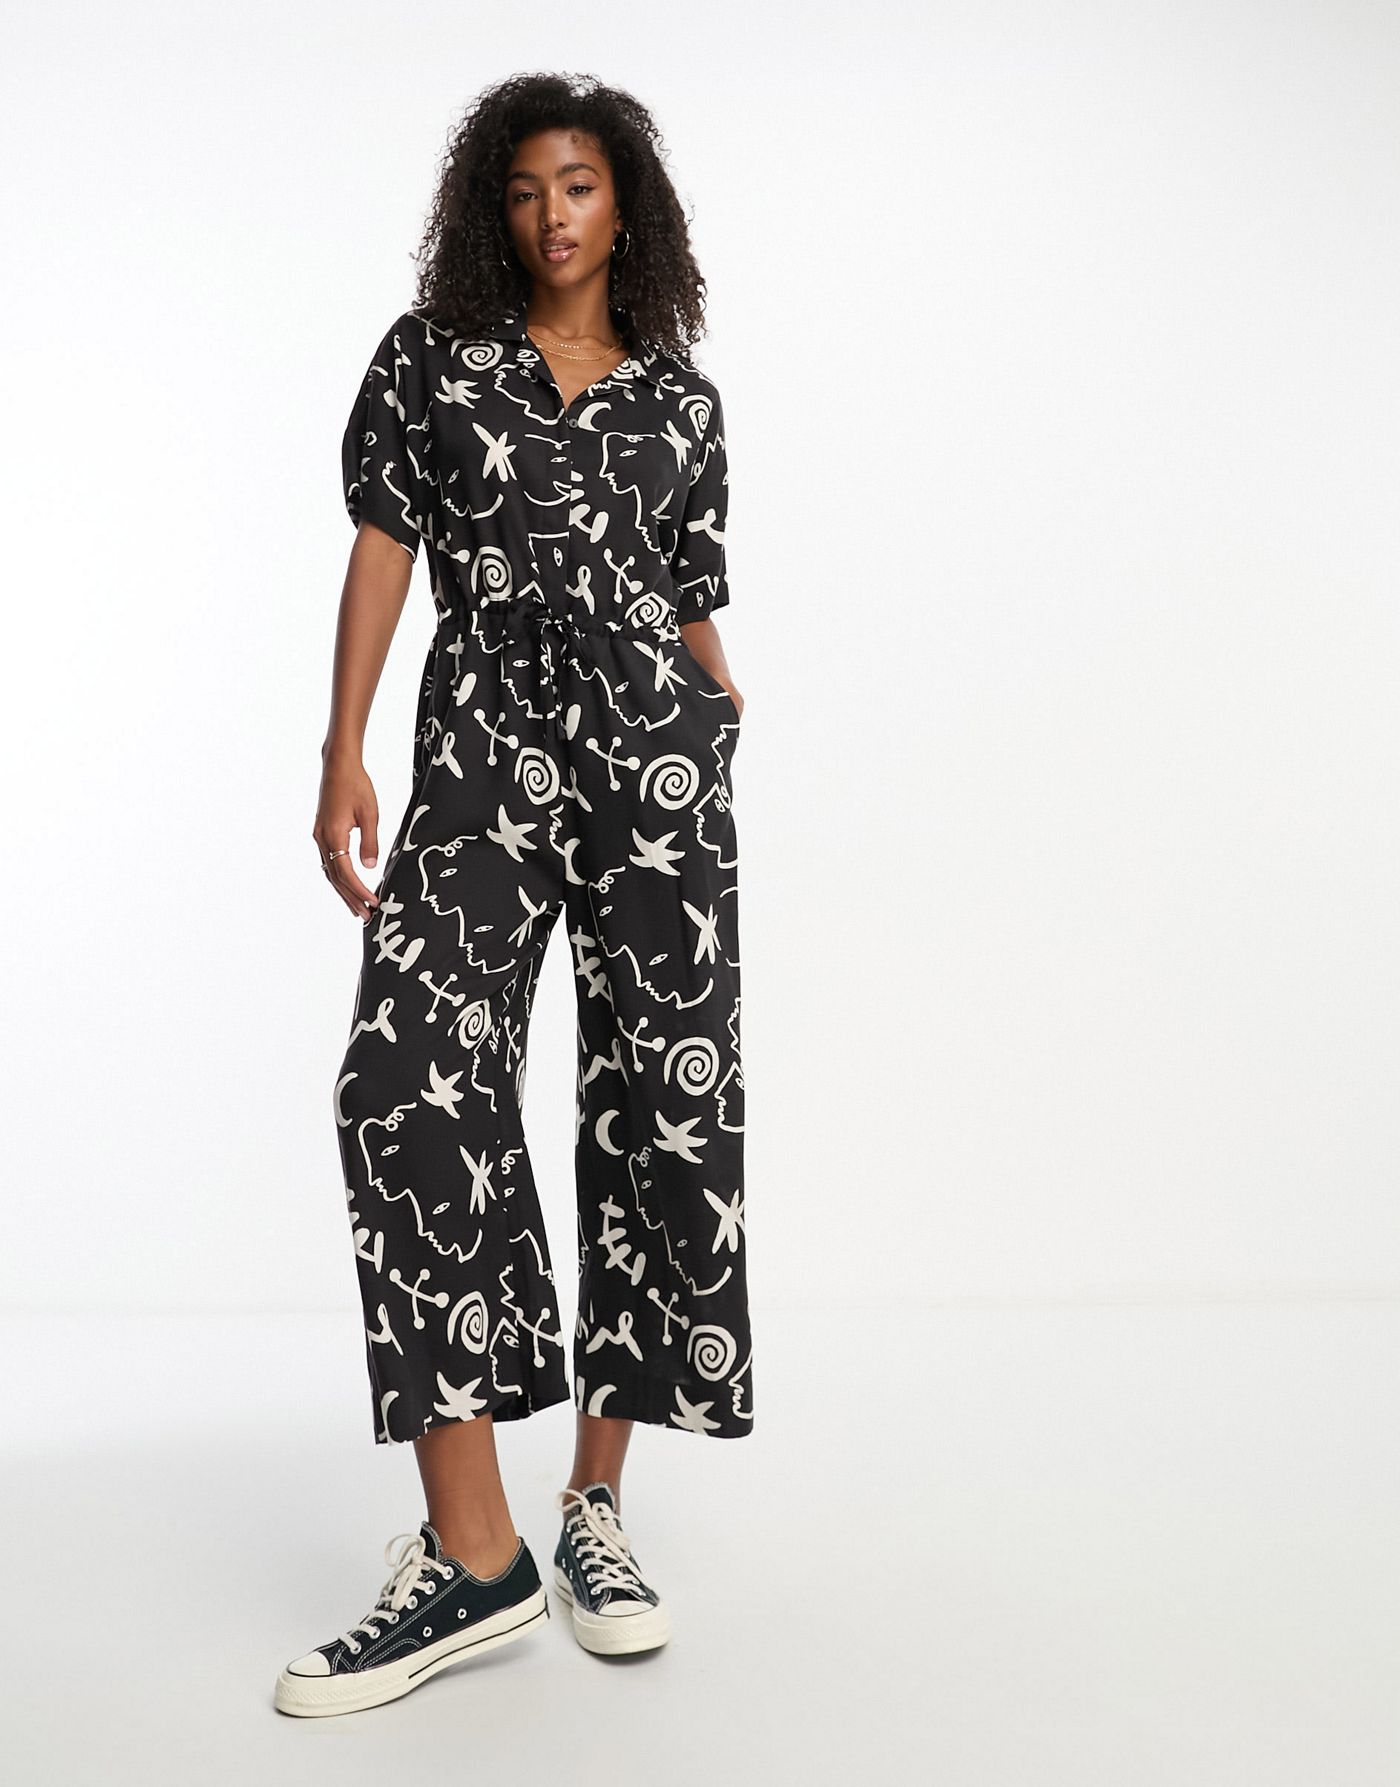 Monki tie waist jumpsuit in black and white face and moon print